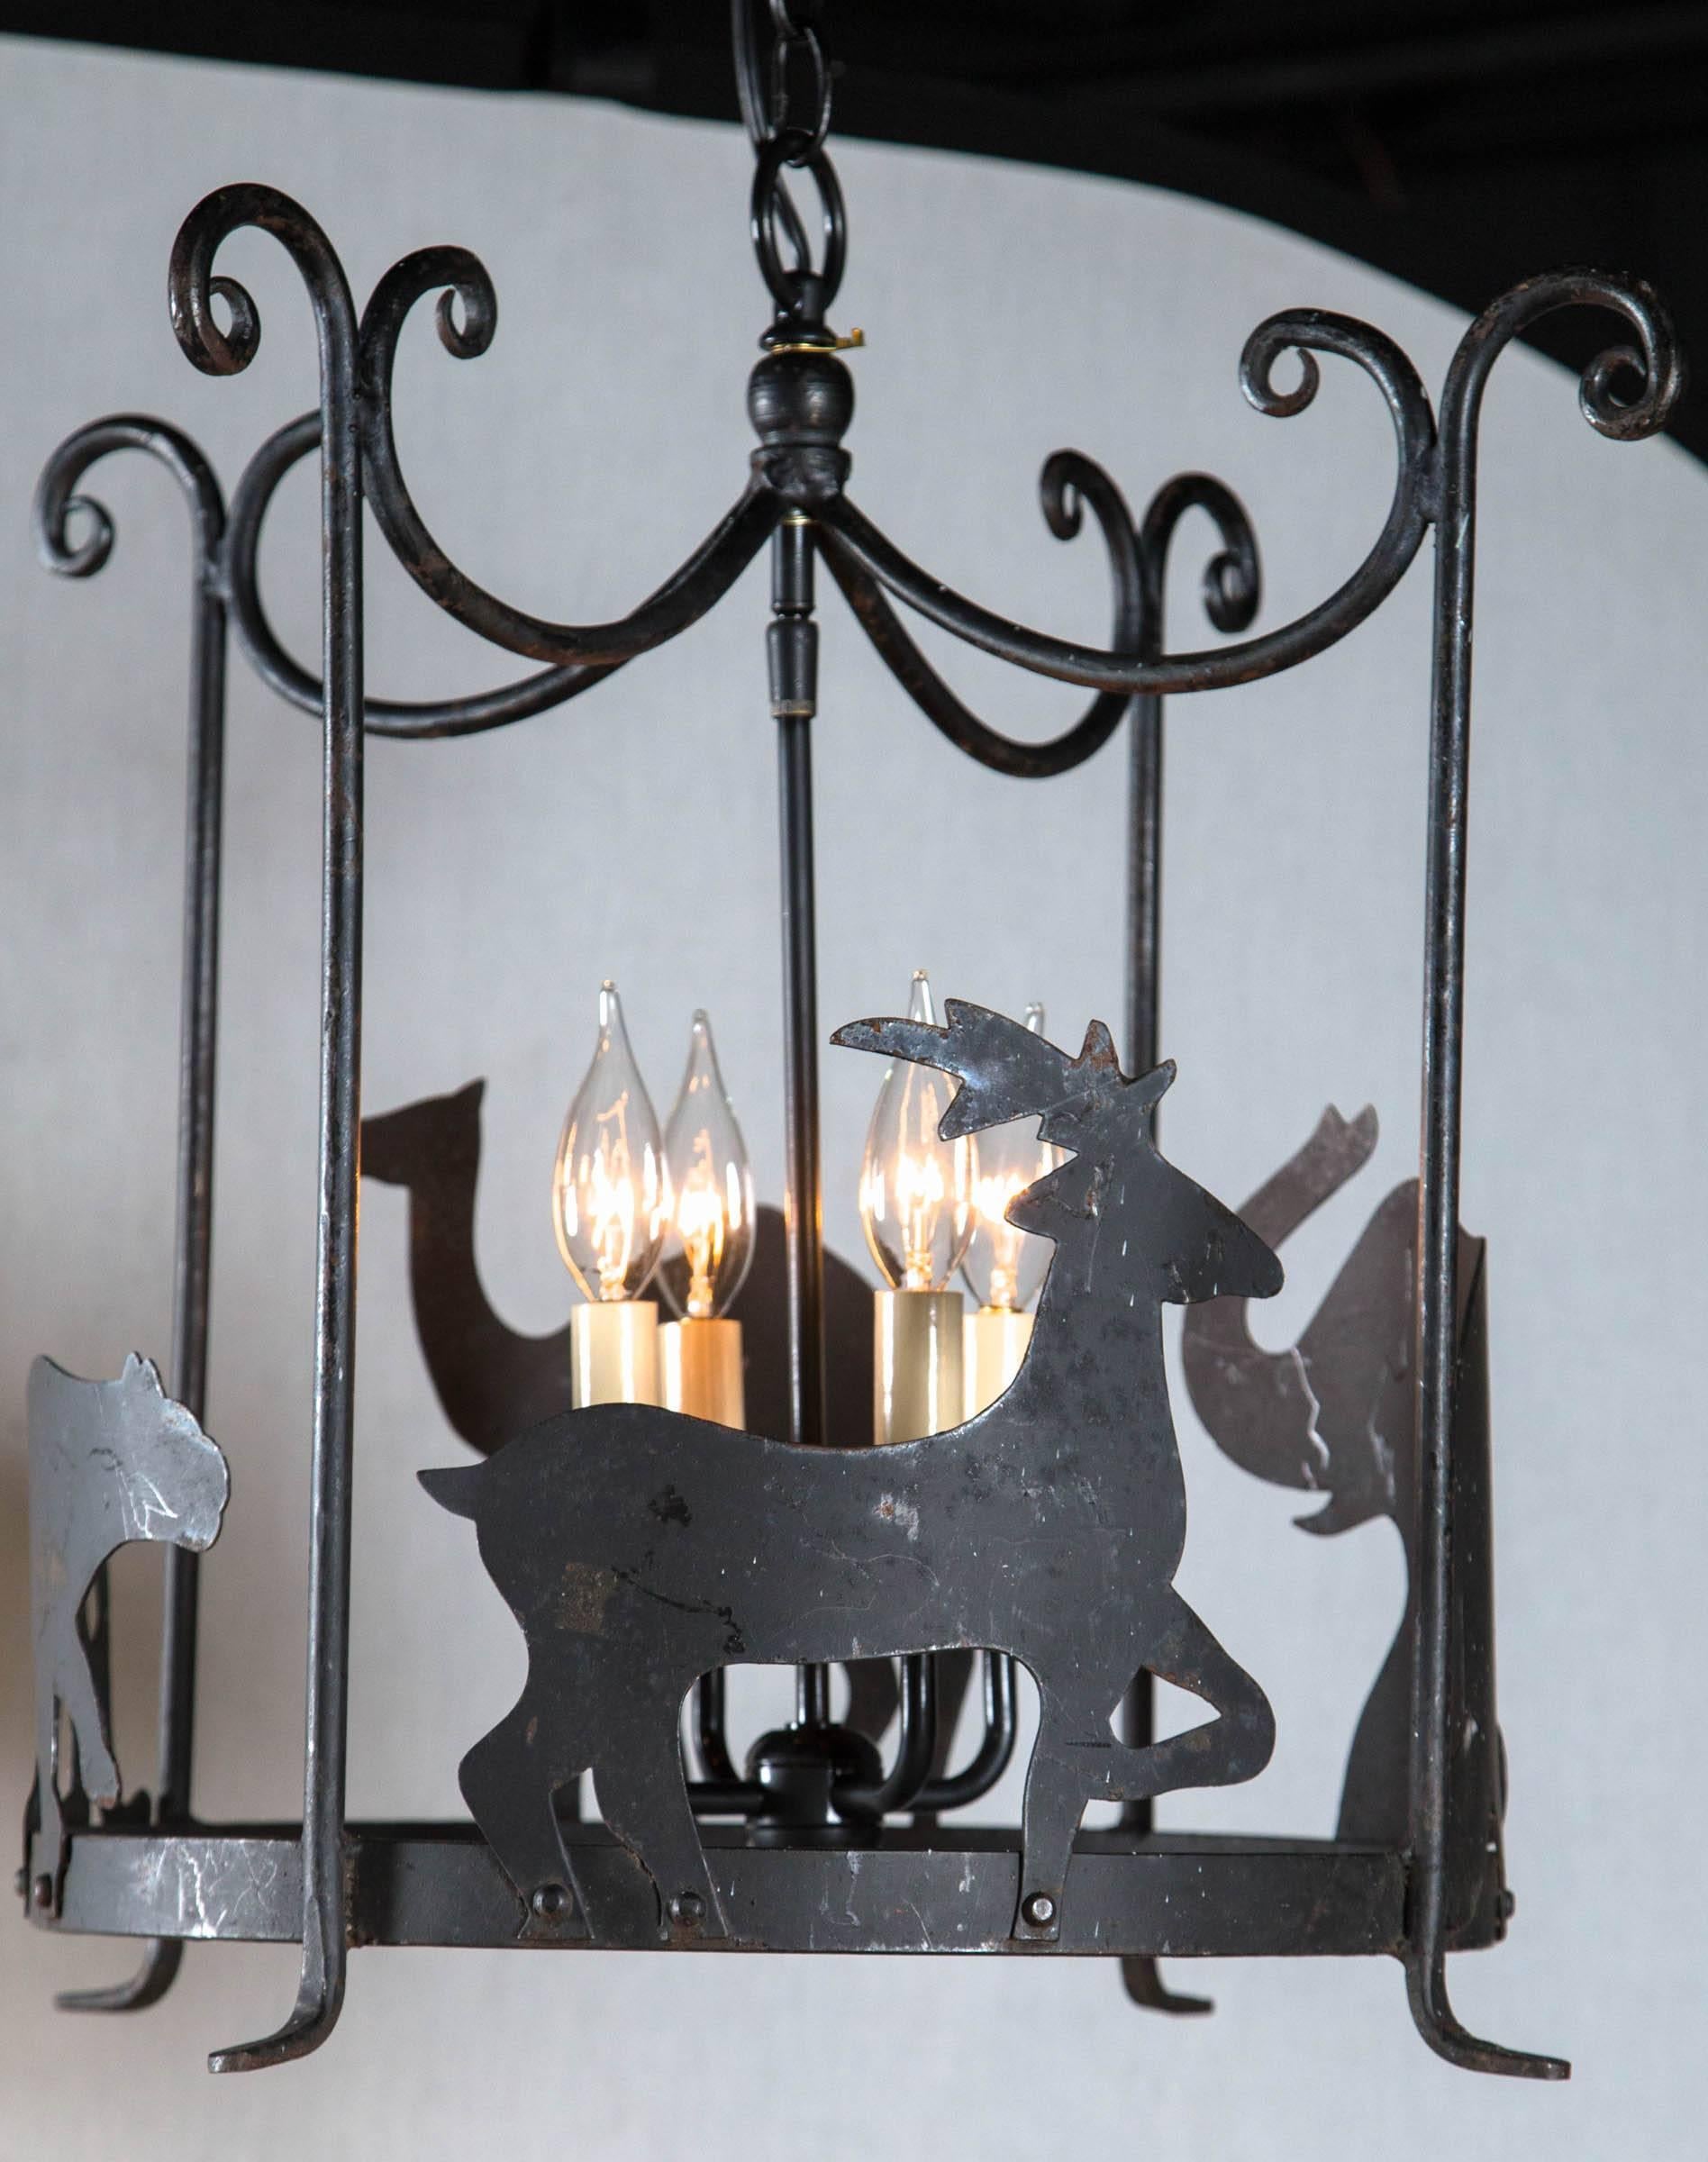 These charming pair of iron chandeliers would add the perfect touch of whimsy to any child's room, family room, or casual eating area. Complete with Elk, elephants, lions and camels and four interior lights. Newly wired and ready for any space in